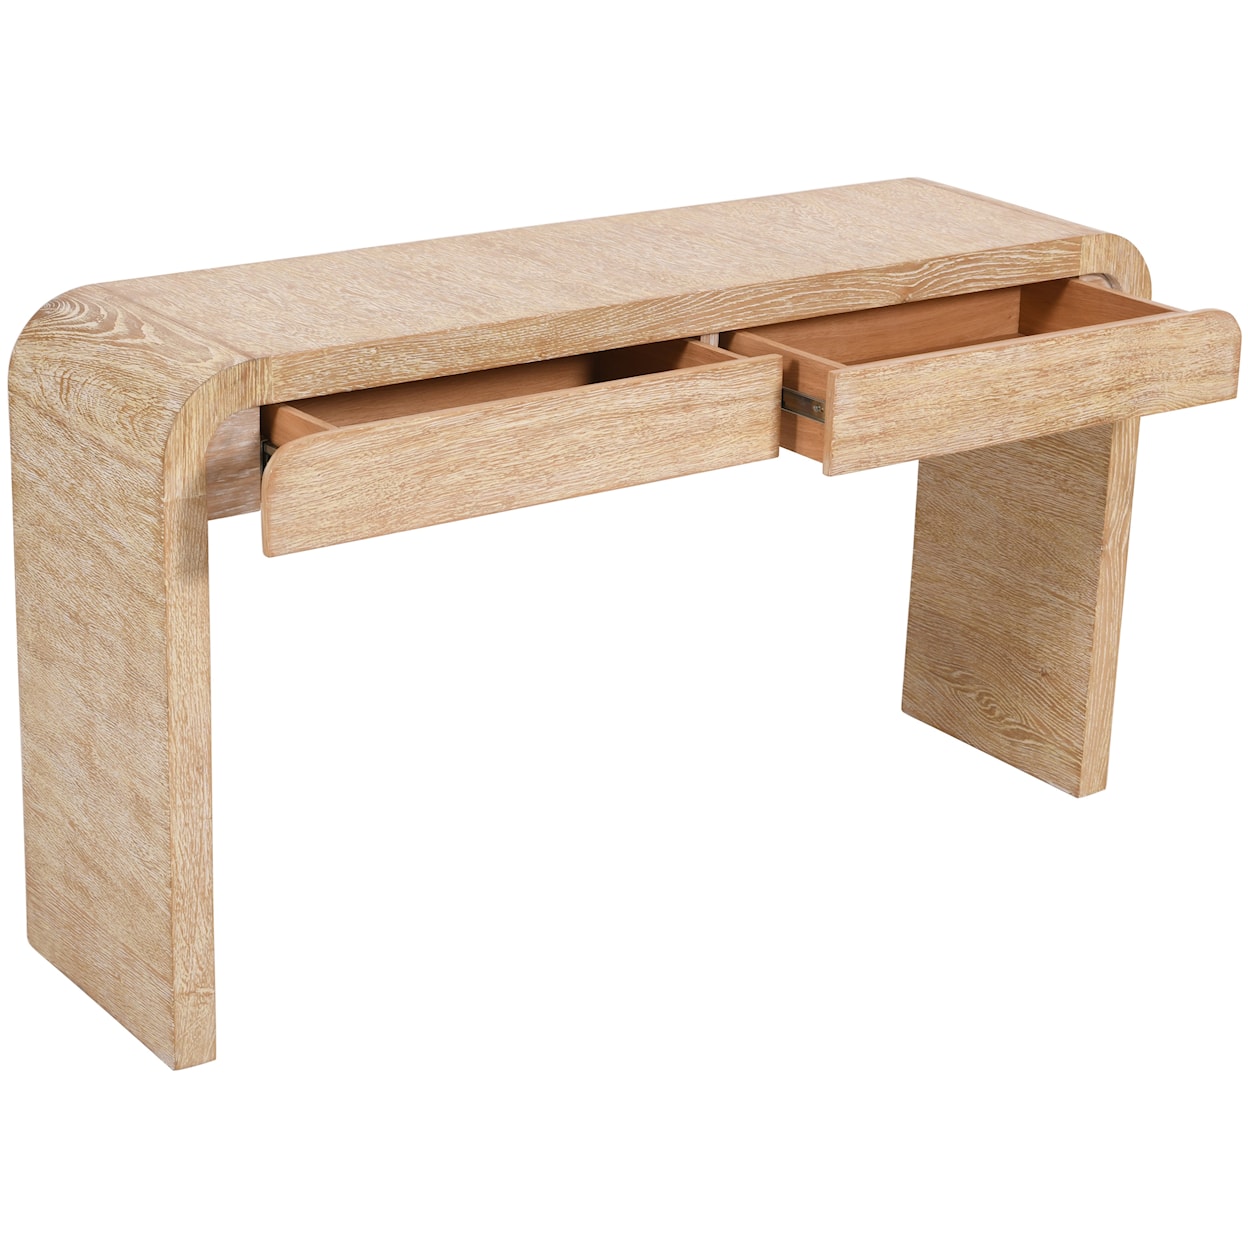 Meridian Furniture Cresthill Console Table